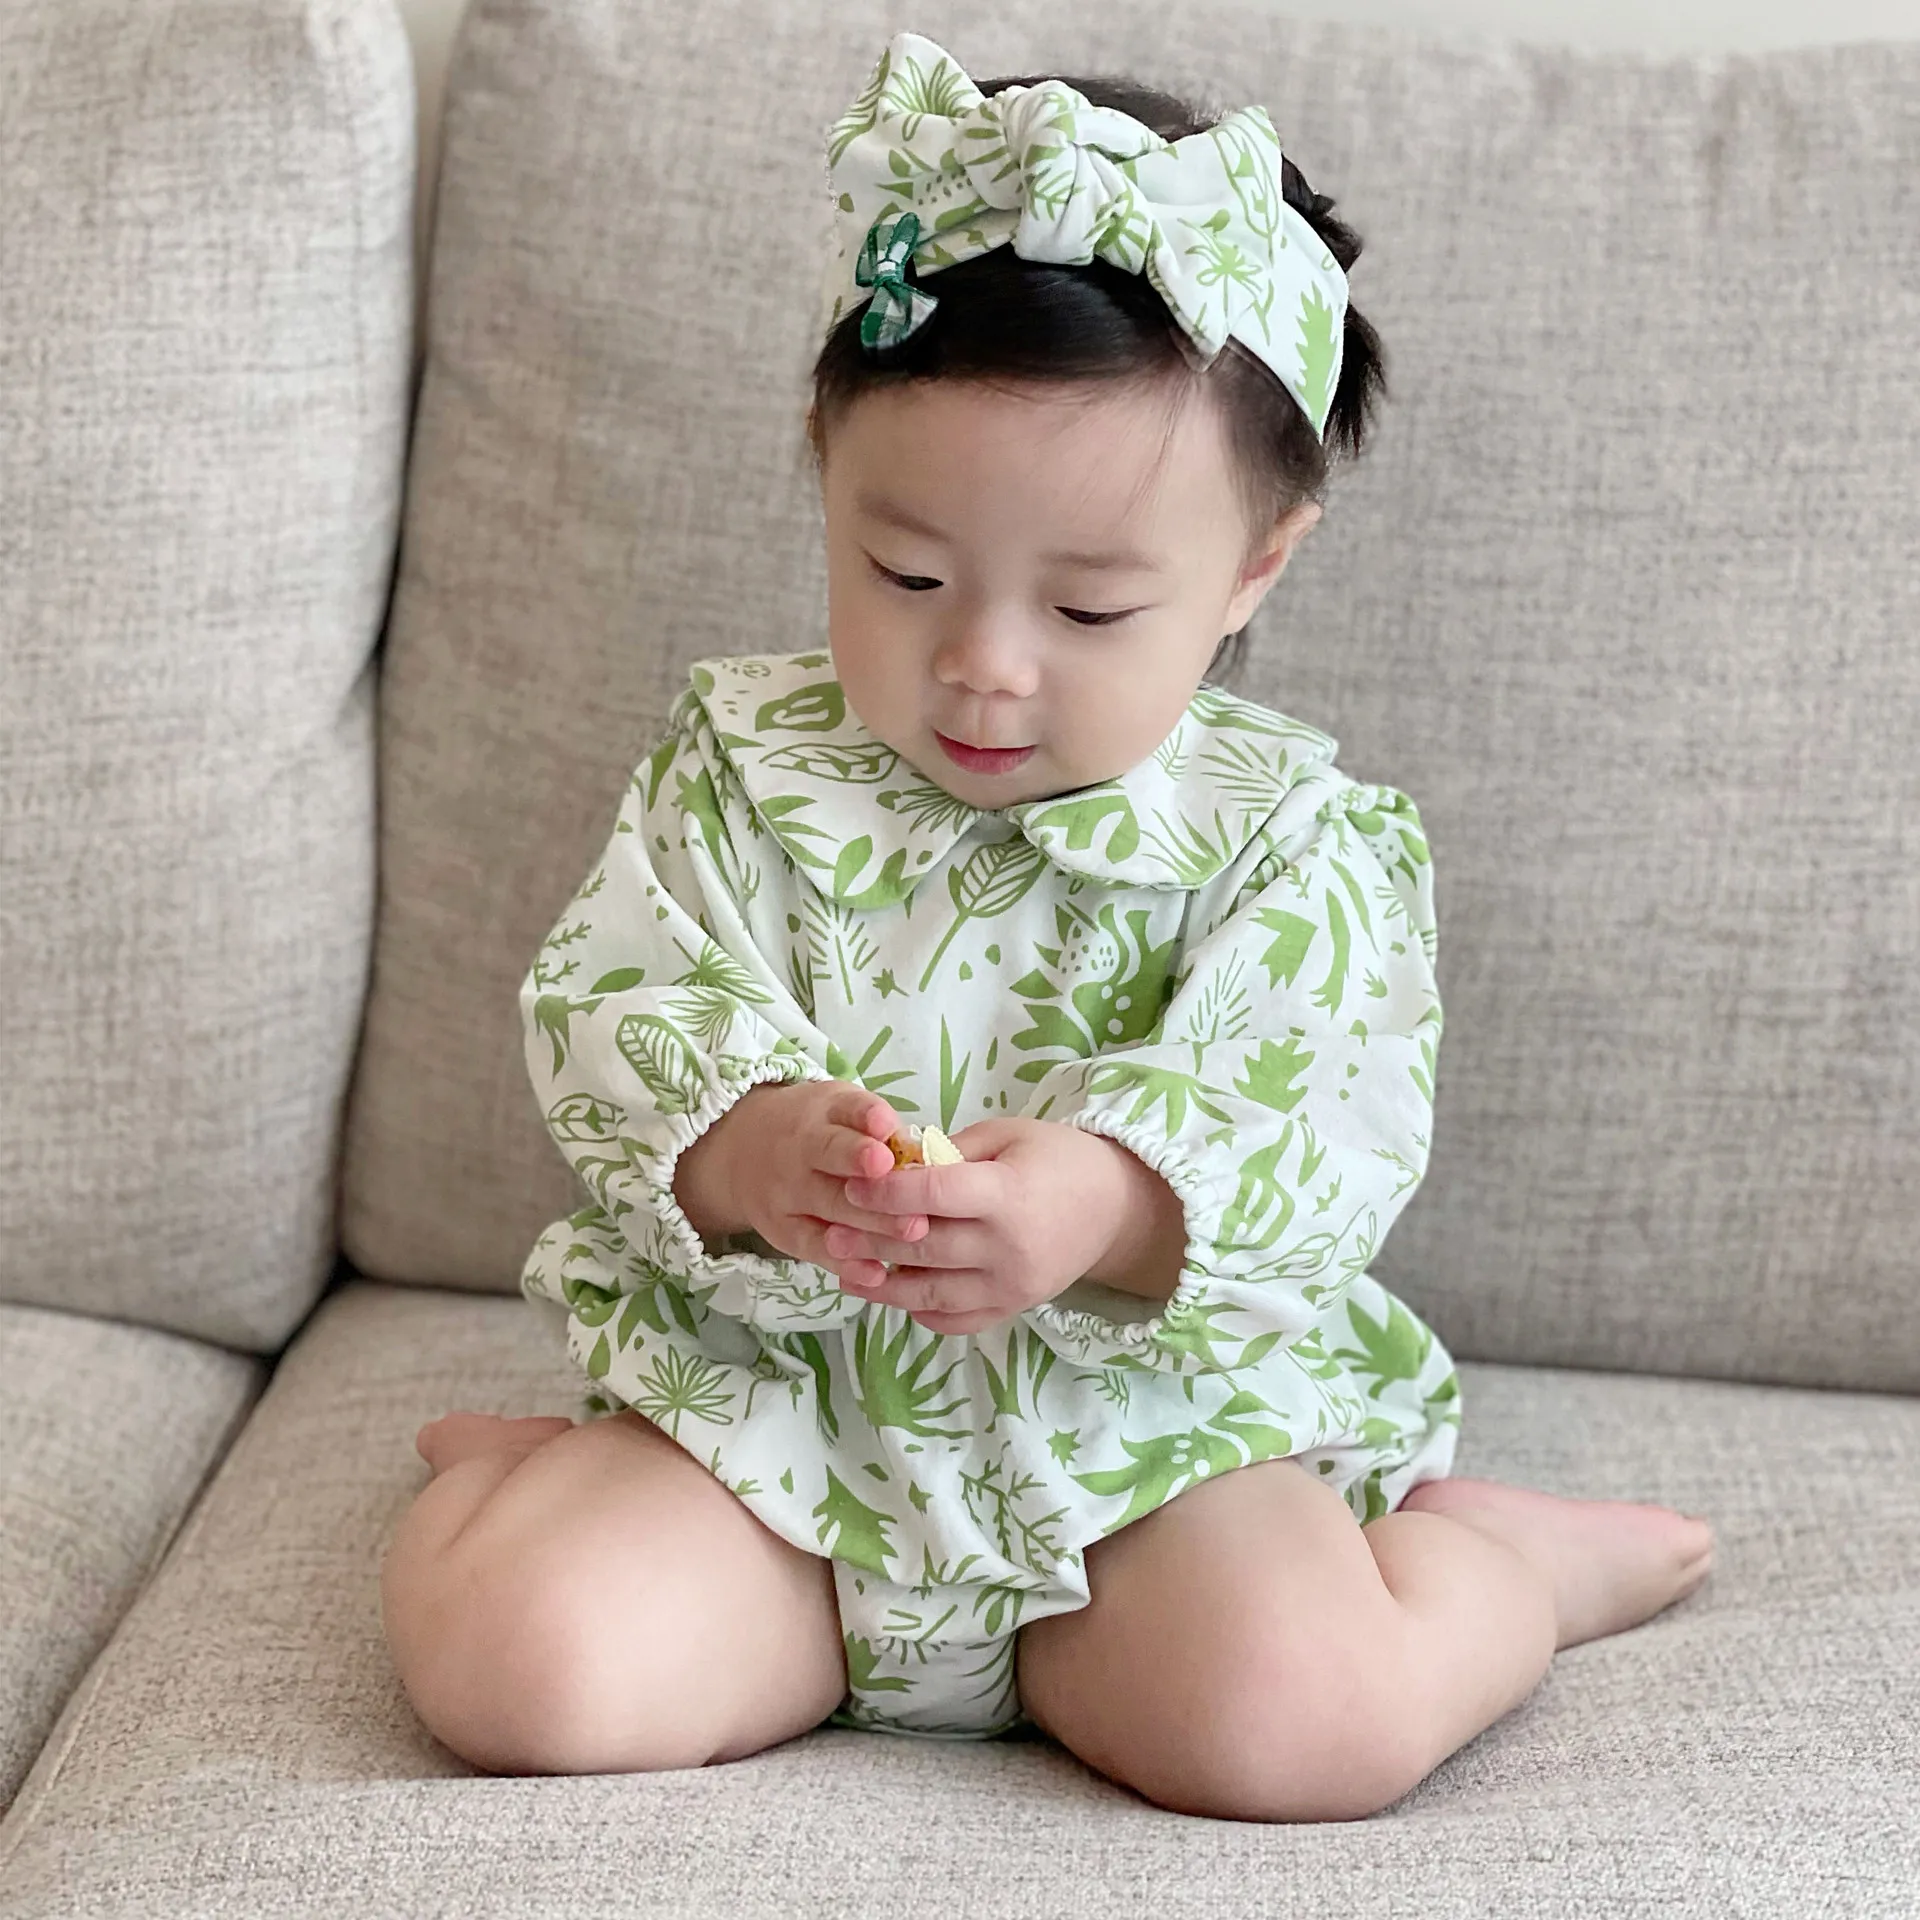 Baby Girl Rompers Long Sleeve Jumpsuits One-piece With Hair Band Cotton Leaf Print Newborn Baby Clothes 0-24M bebes ropa